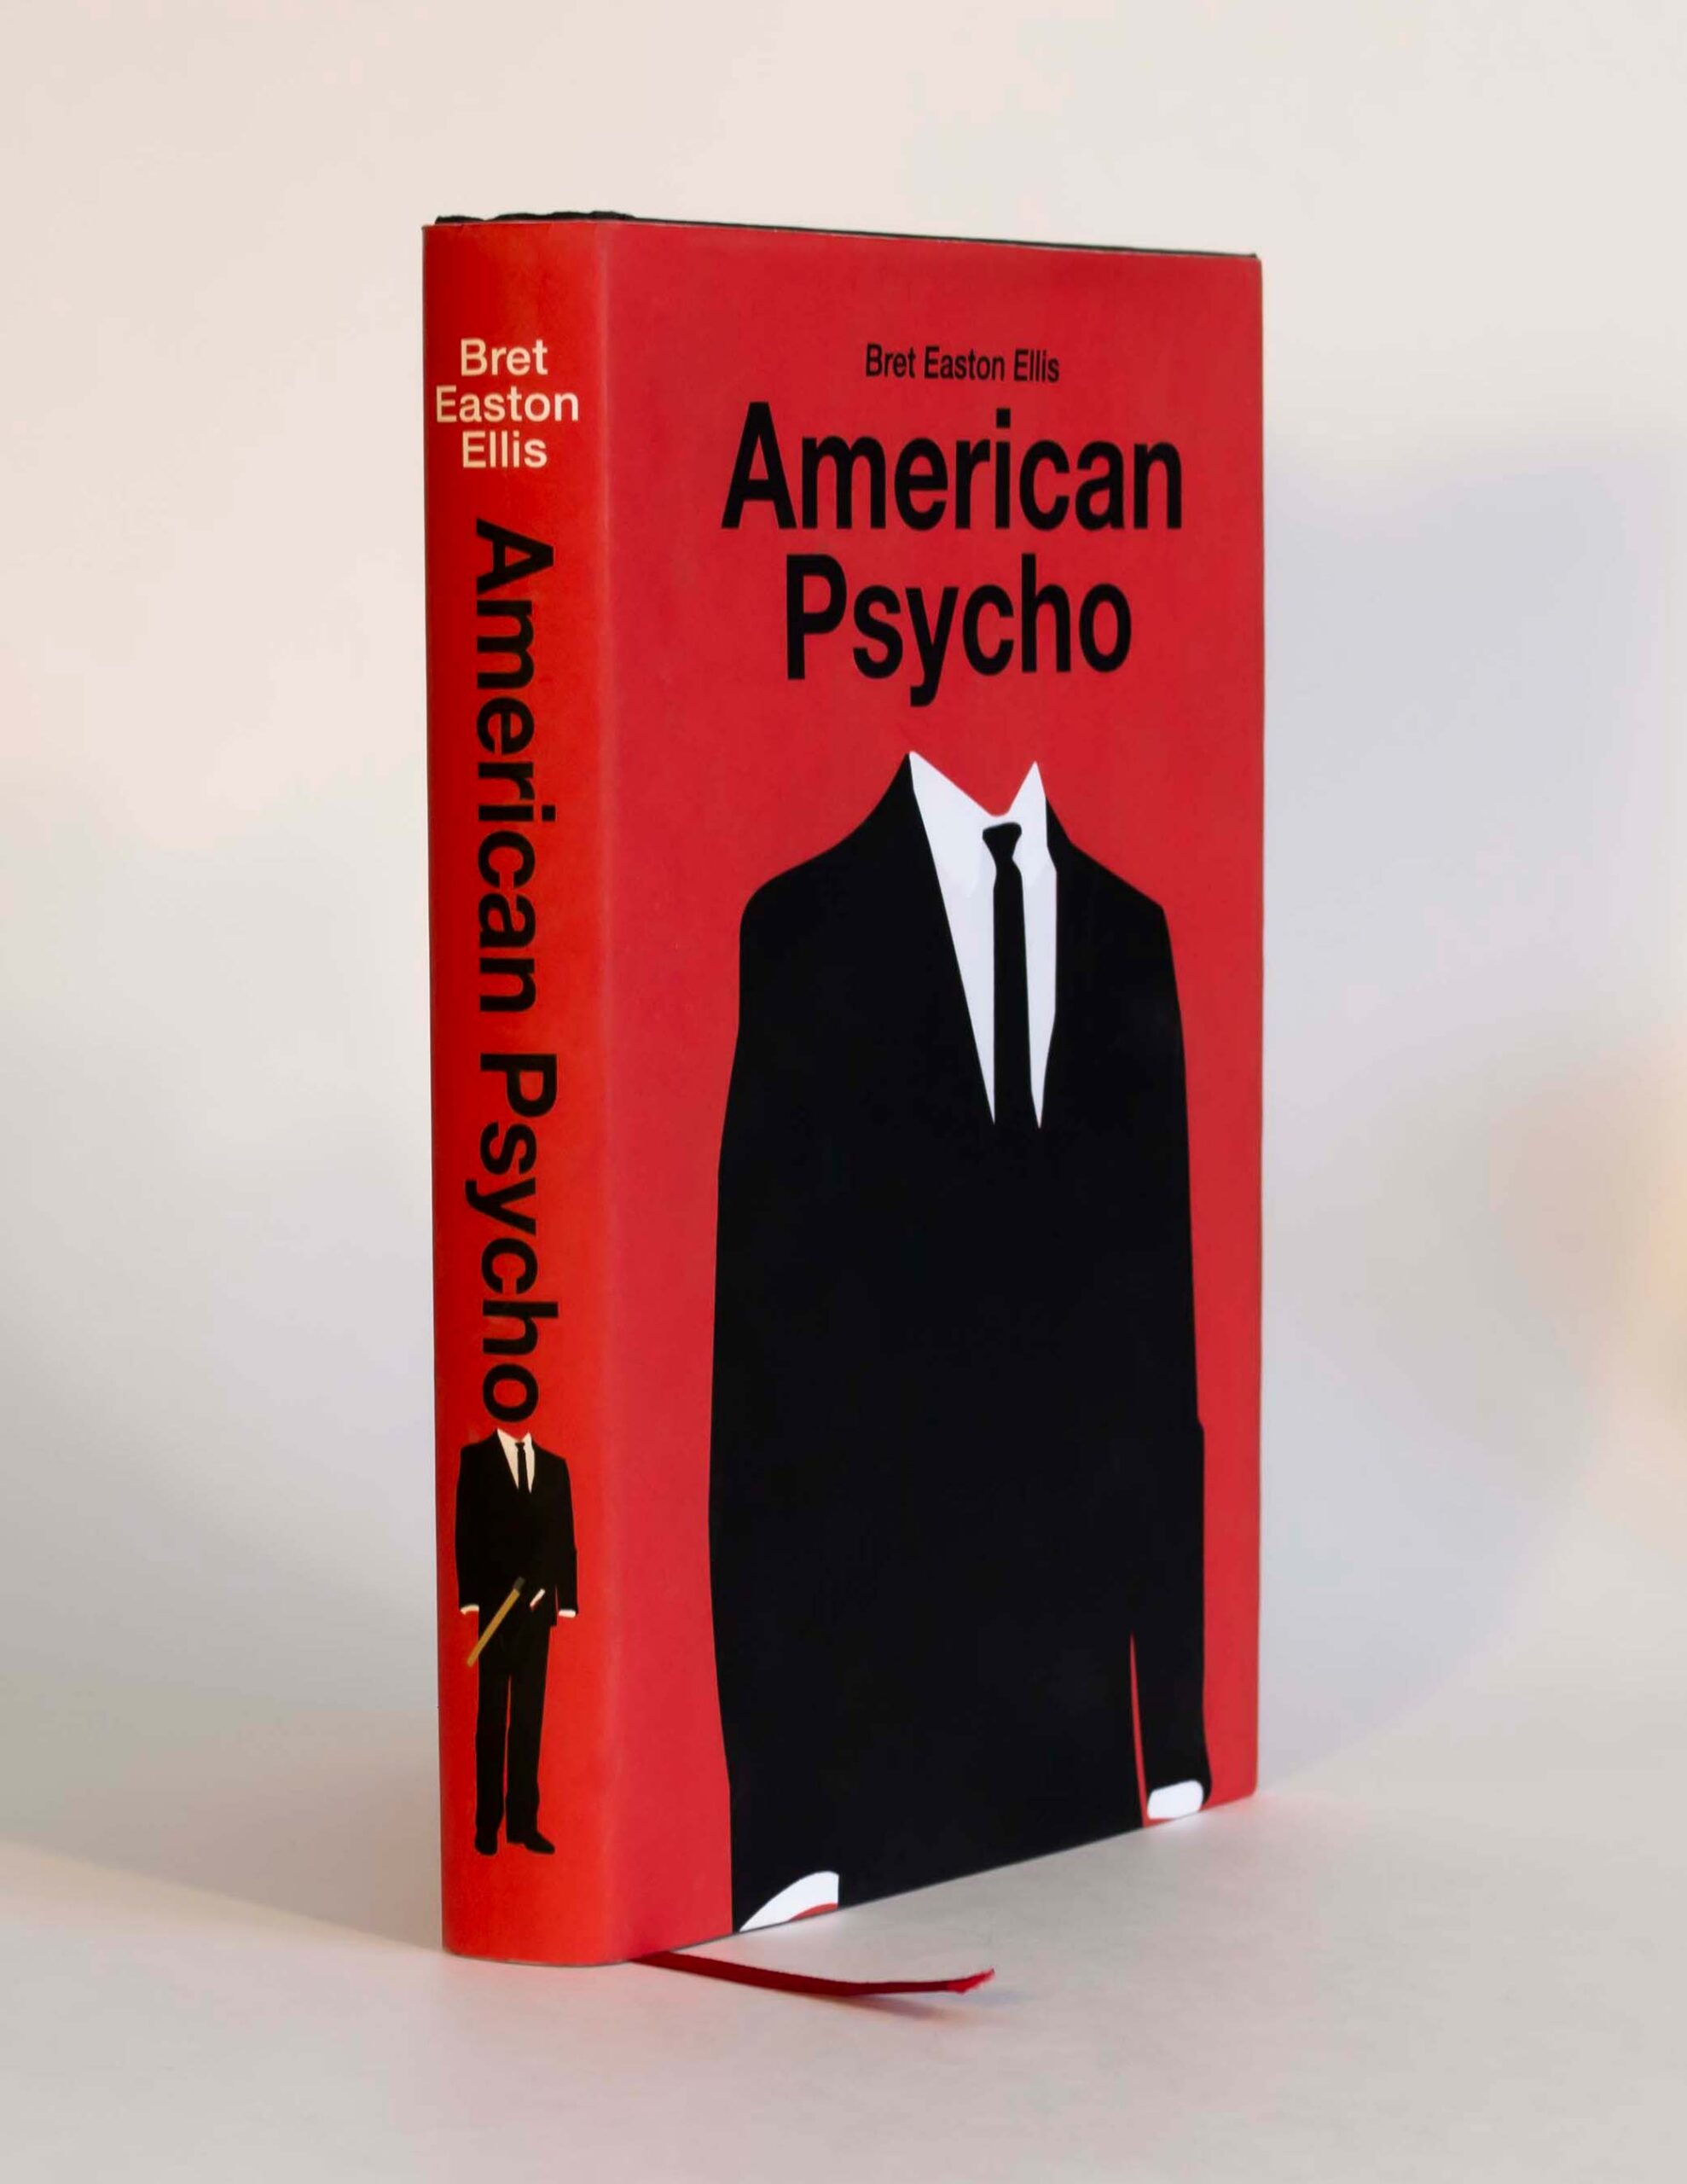 Picture of the book American Psycho standing up with red cover. On the cover there is a minimalist illustration of a suit. The spine of the book has the title and the illustration of the suit holding an axe.